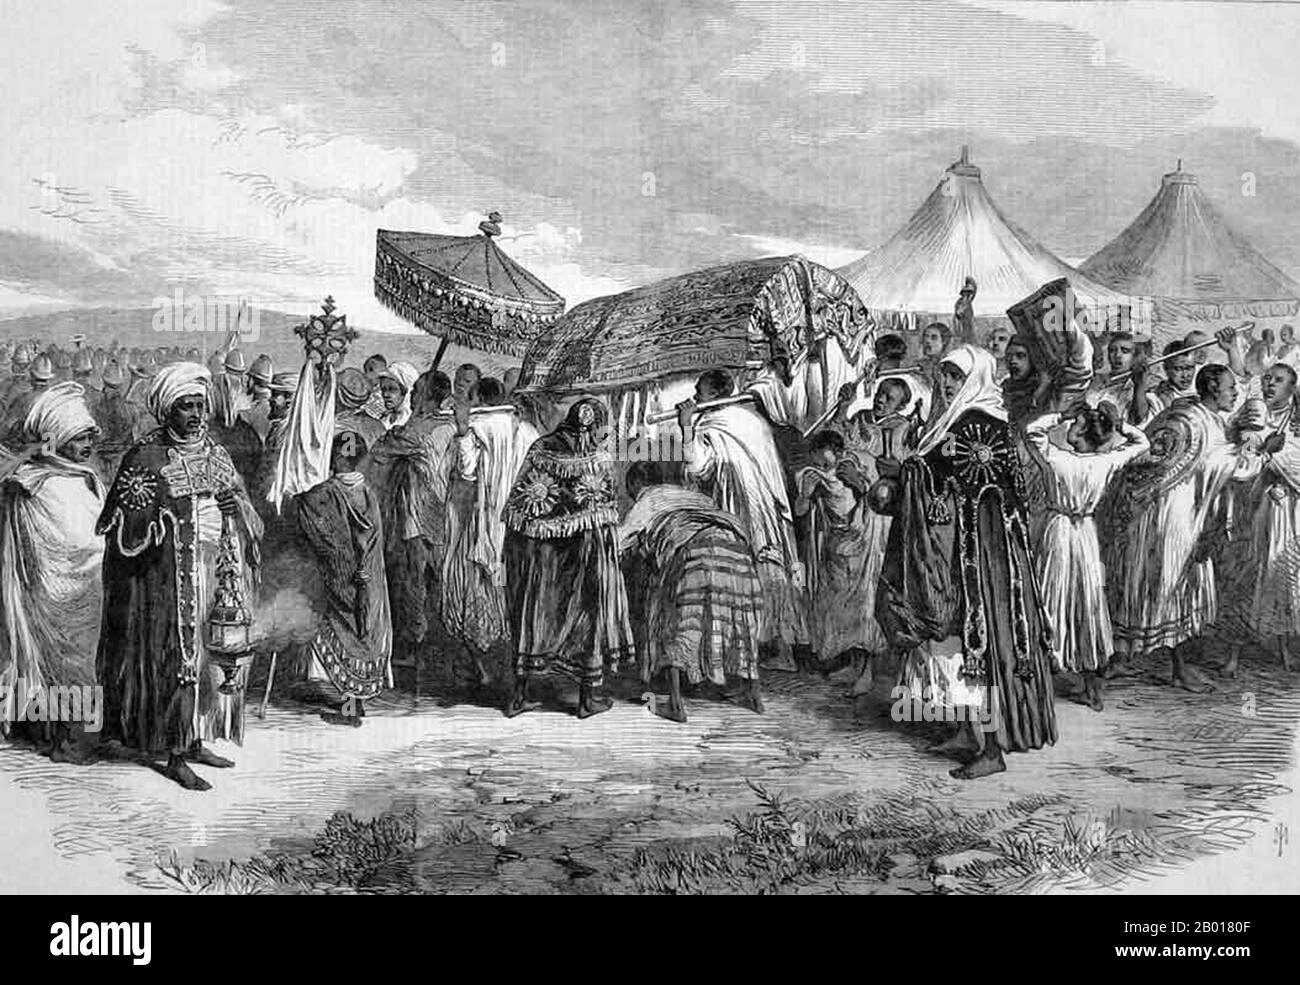 Ethiopia: 'Funeral of the Widow of King Theodore at Aikhullet'. Illustration, c. 1868.  The British 1868 Expedition to Abyssinia was a punitive expedition carried out by armed forces of the British Empire against the Ethiopian Empire. Emperor Tewodros II of Ethiopia, also known as 'Theodore', imprisoned several missionaries and two representatives of the British government. The punitive expedition launched by the British in response required the transportation of a sizable military force hundreds of miles across mountainous terrain lacking any road system. Stock Photo